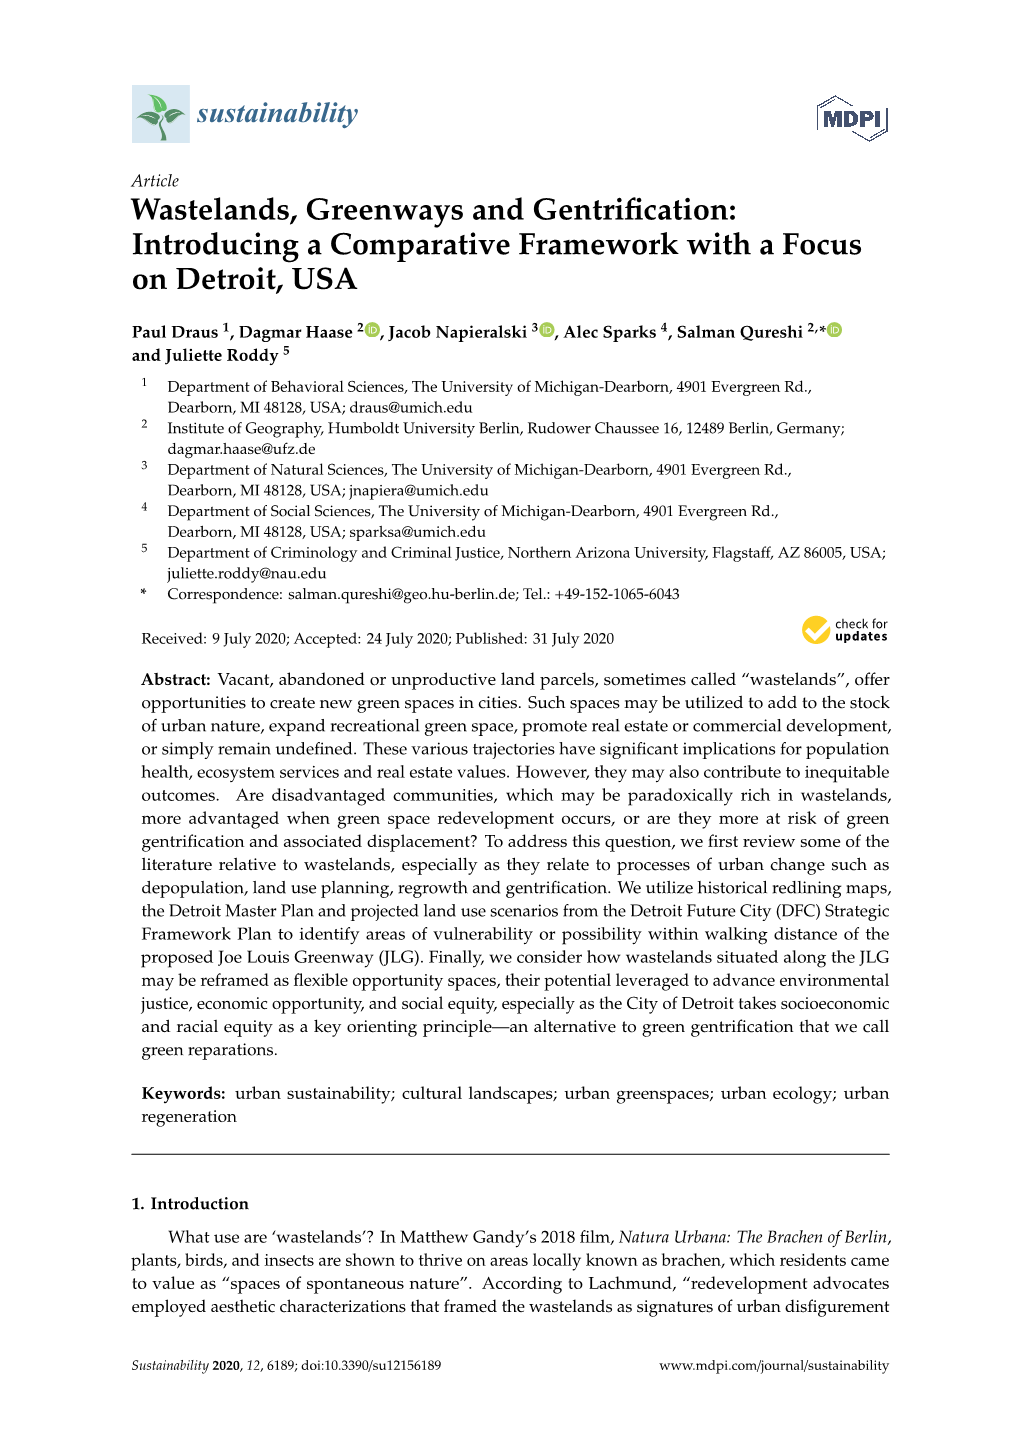 Introducing a Comparative Framework with a Focus on Detroit, USA